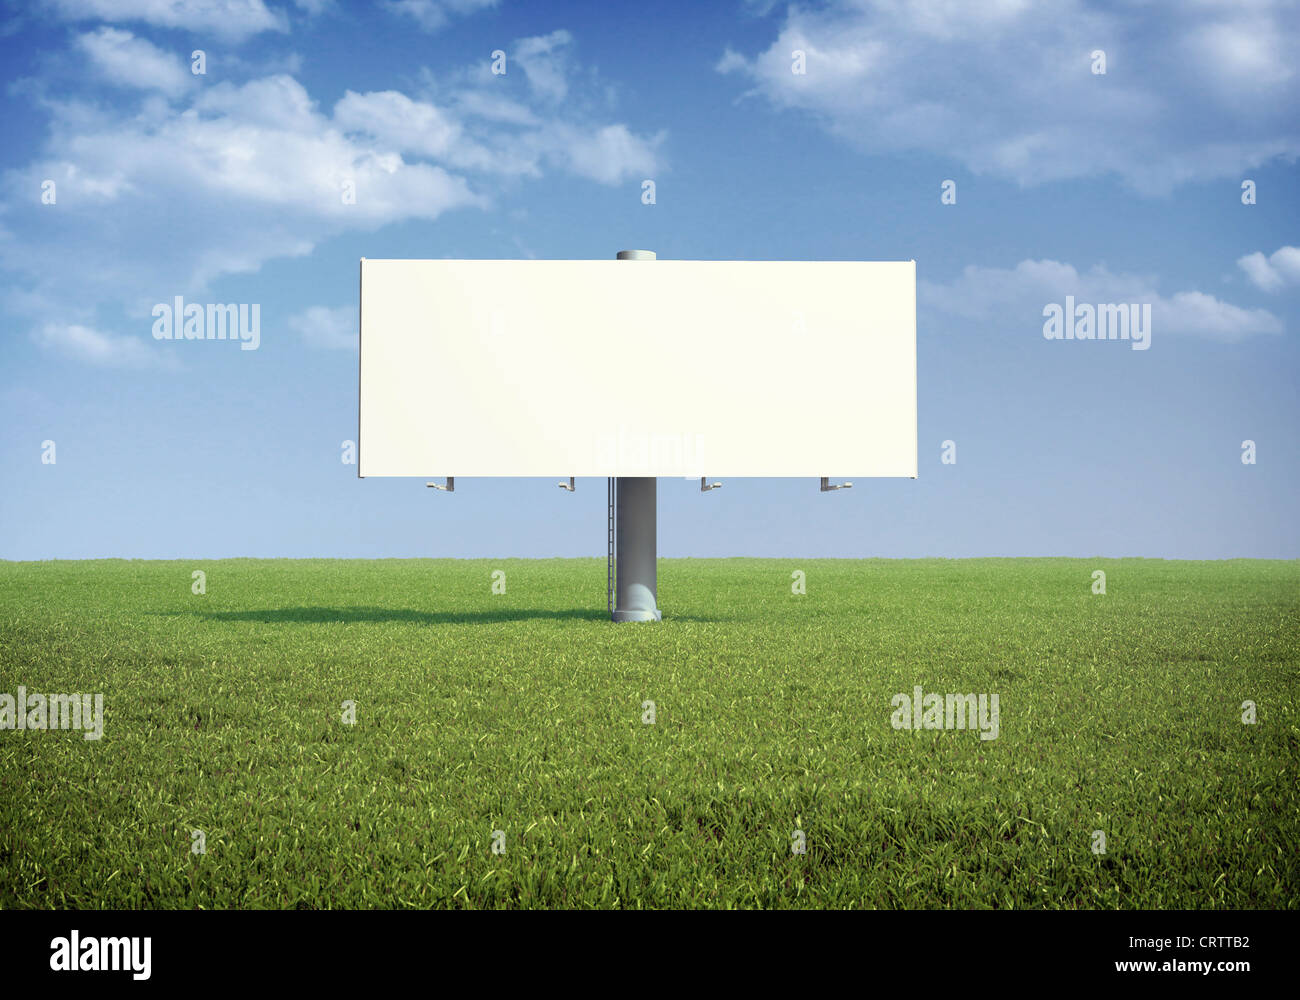 Ad billboard standing in a field of grass Stock Photo